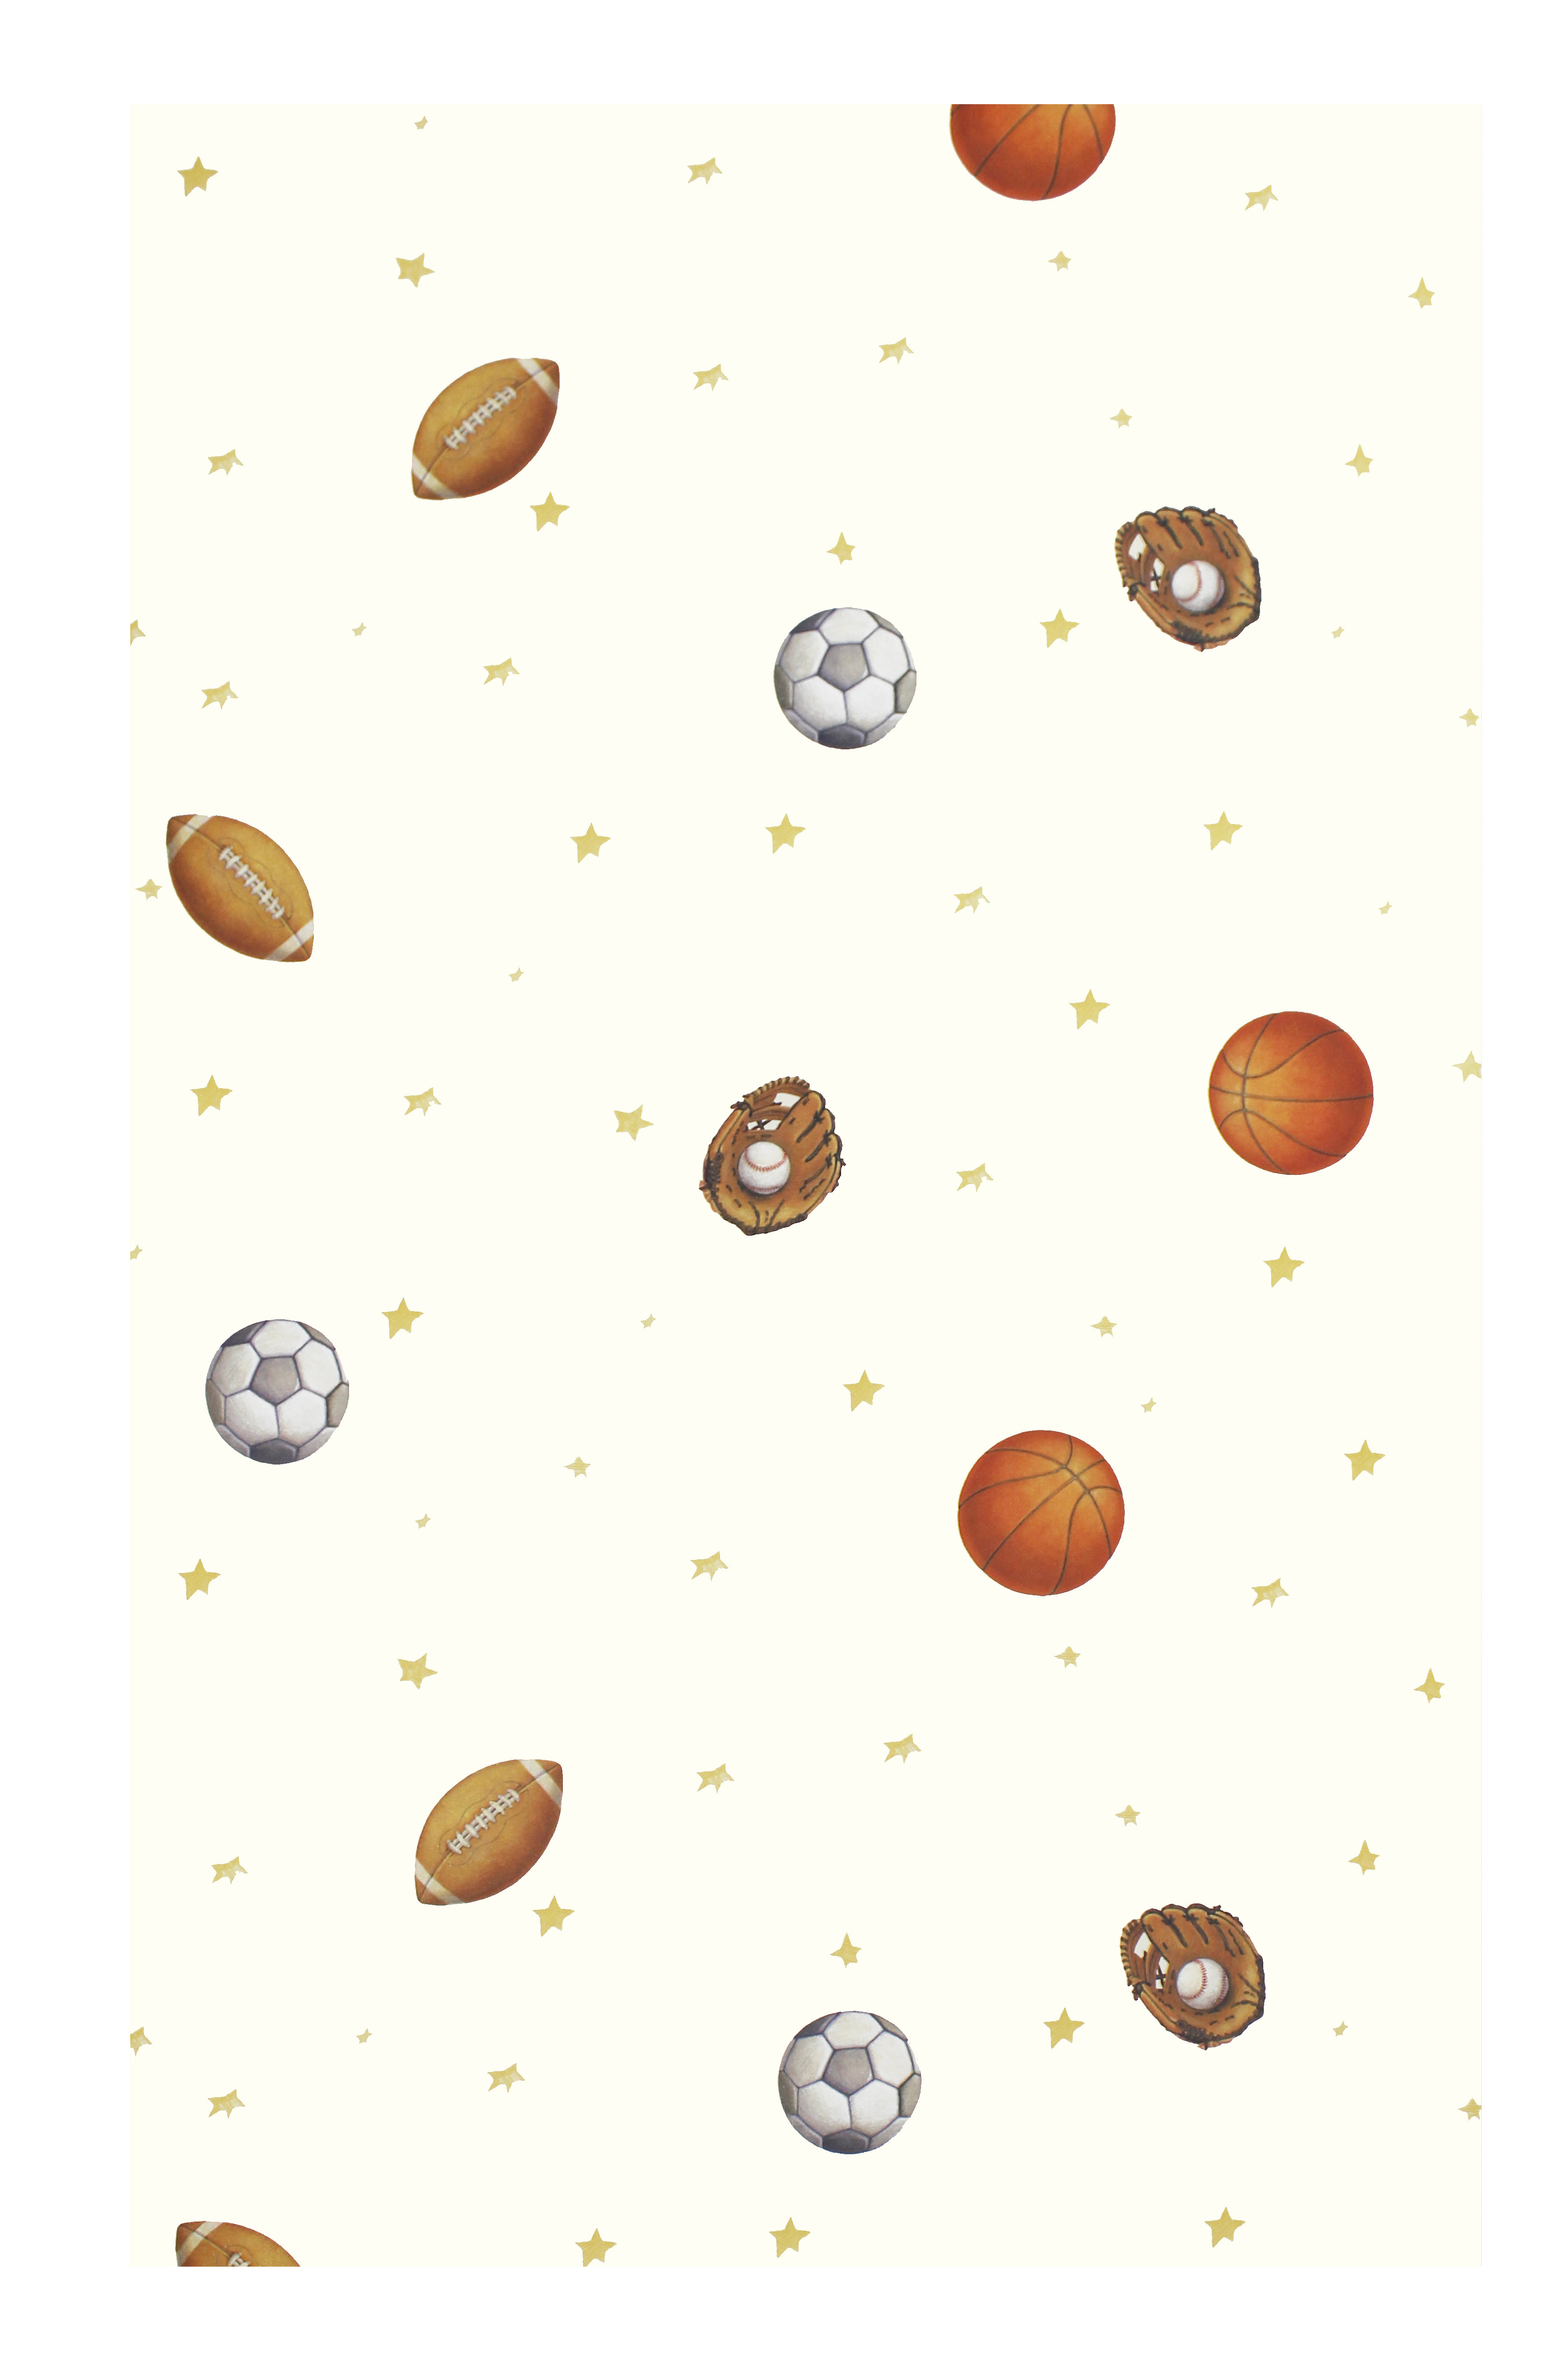 One Yellow Sports Balls Prepasted Wallpaper Roll, 33 feet (10 m) long by 20.5 inches (52 cm) wide. #decor